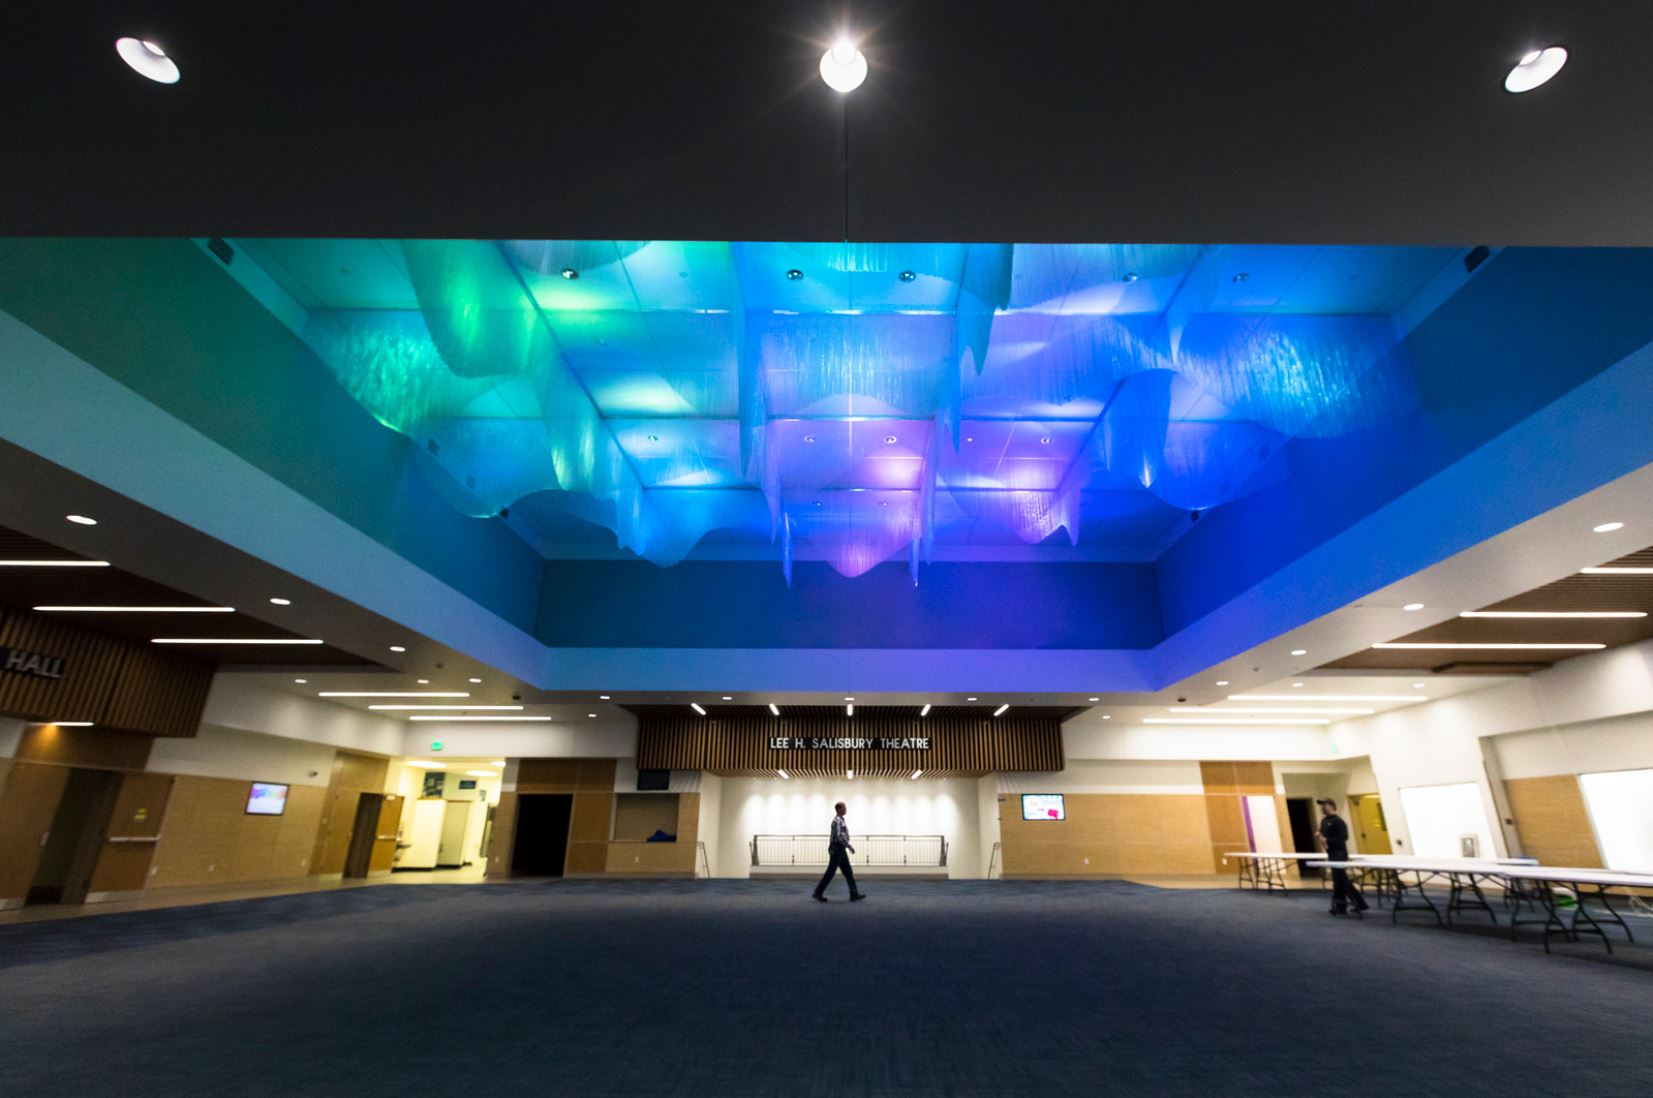 The Regents' Great Hall, on the Fairbanks campus, is now open to the public. The newly refurbished hall features an aurora-like installation on the ceiling.